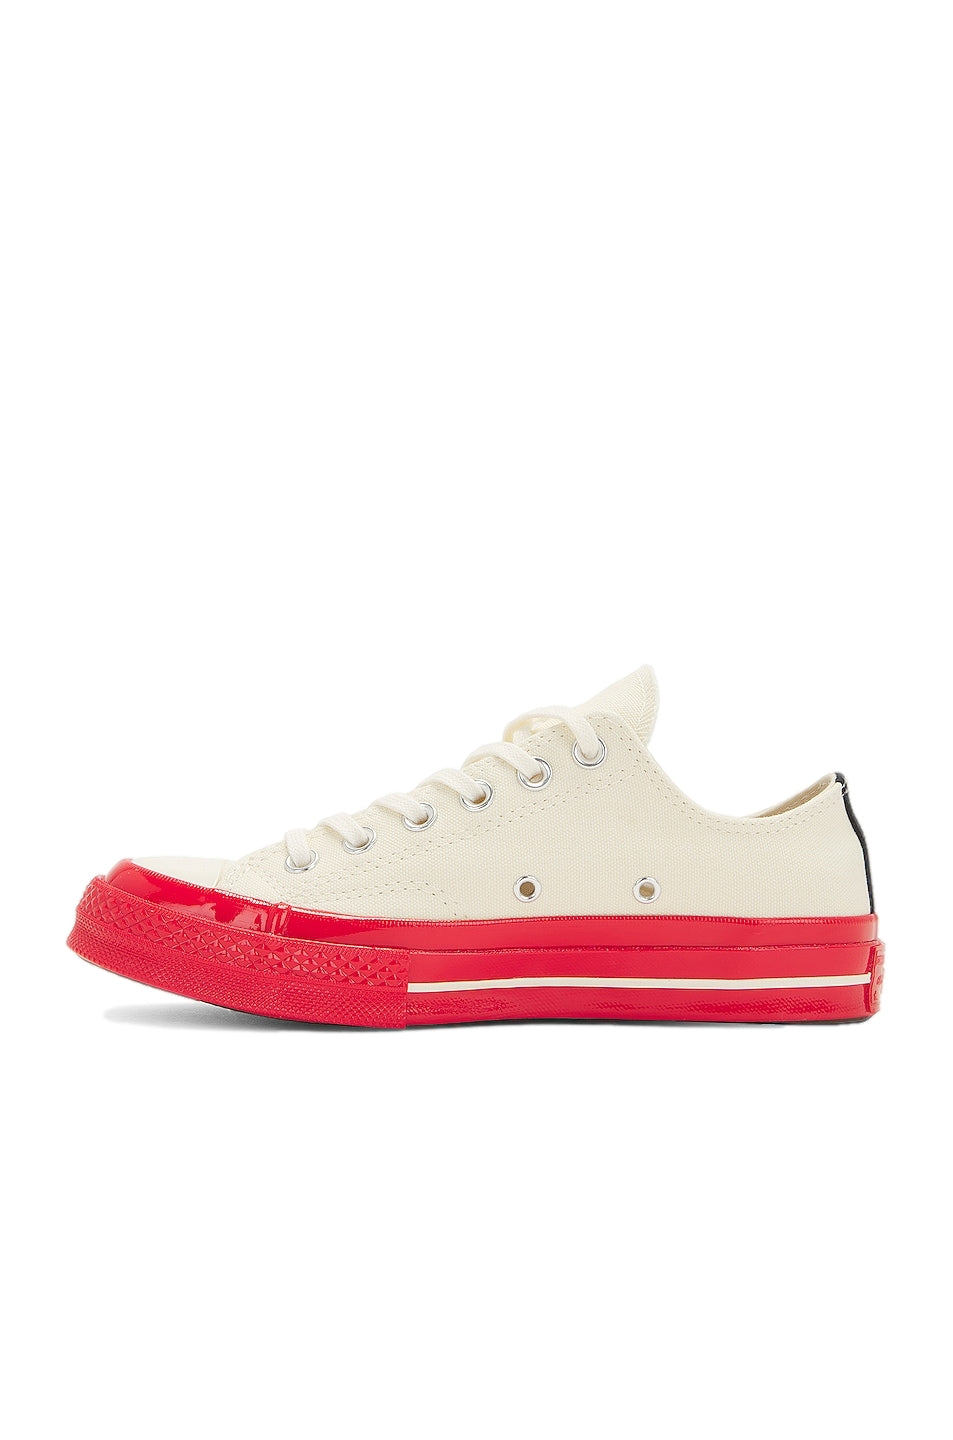 Comme des Garcons Play x Converse CDG Red Sole Low Top White Sko Off-White - [modostore.no]